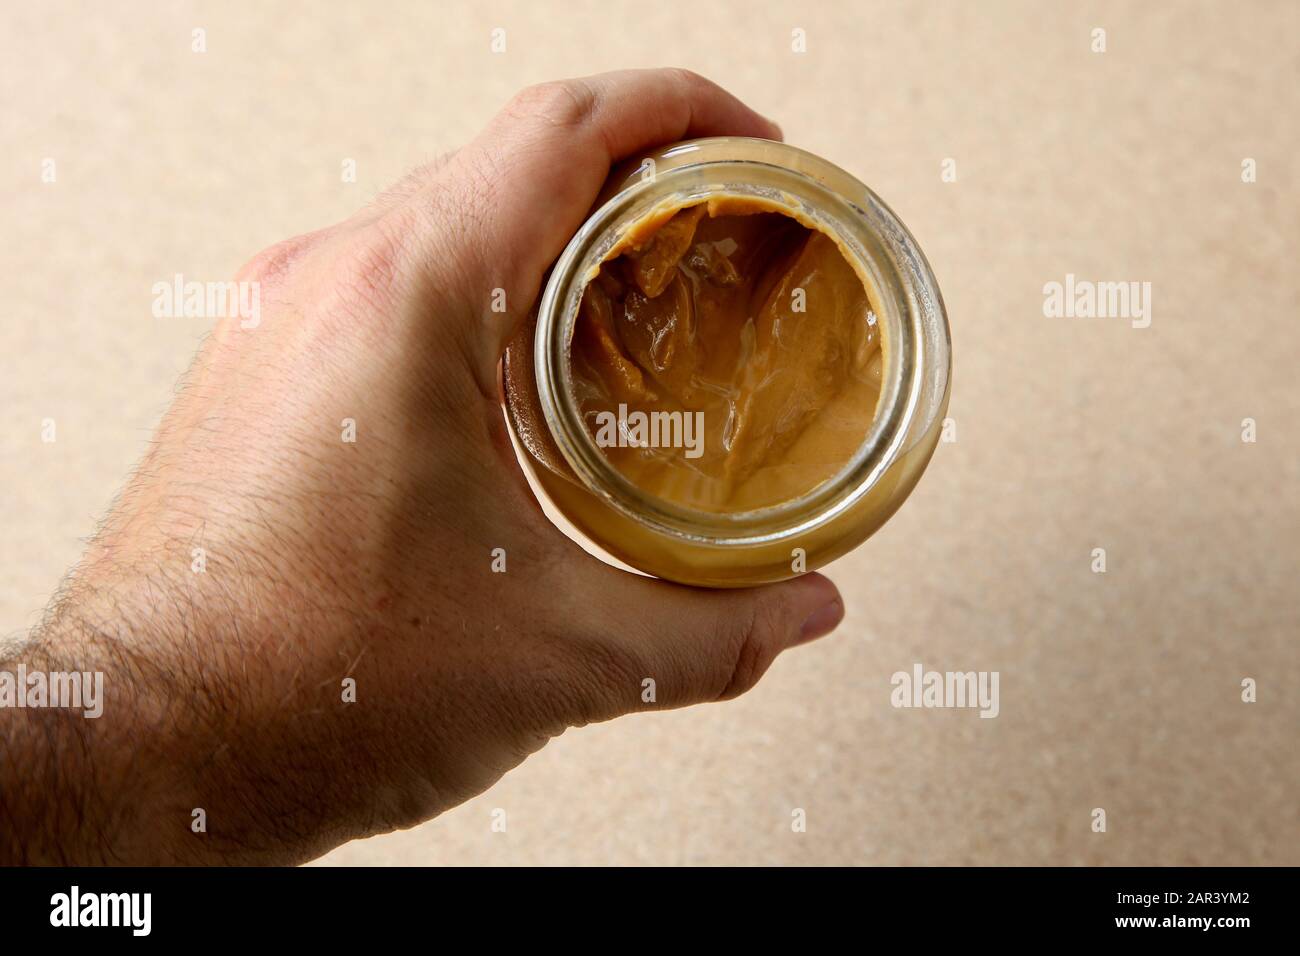 Download A High Angle Shot Of A Person Holding A Jar Of Peanut Butter With A Blurred Background Stock Photo Alamy Yellowimages Mockups